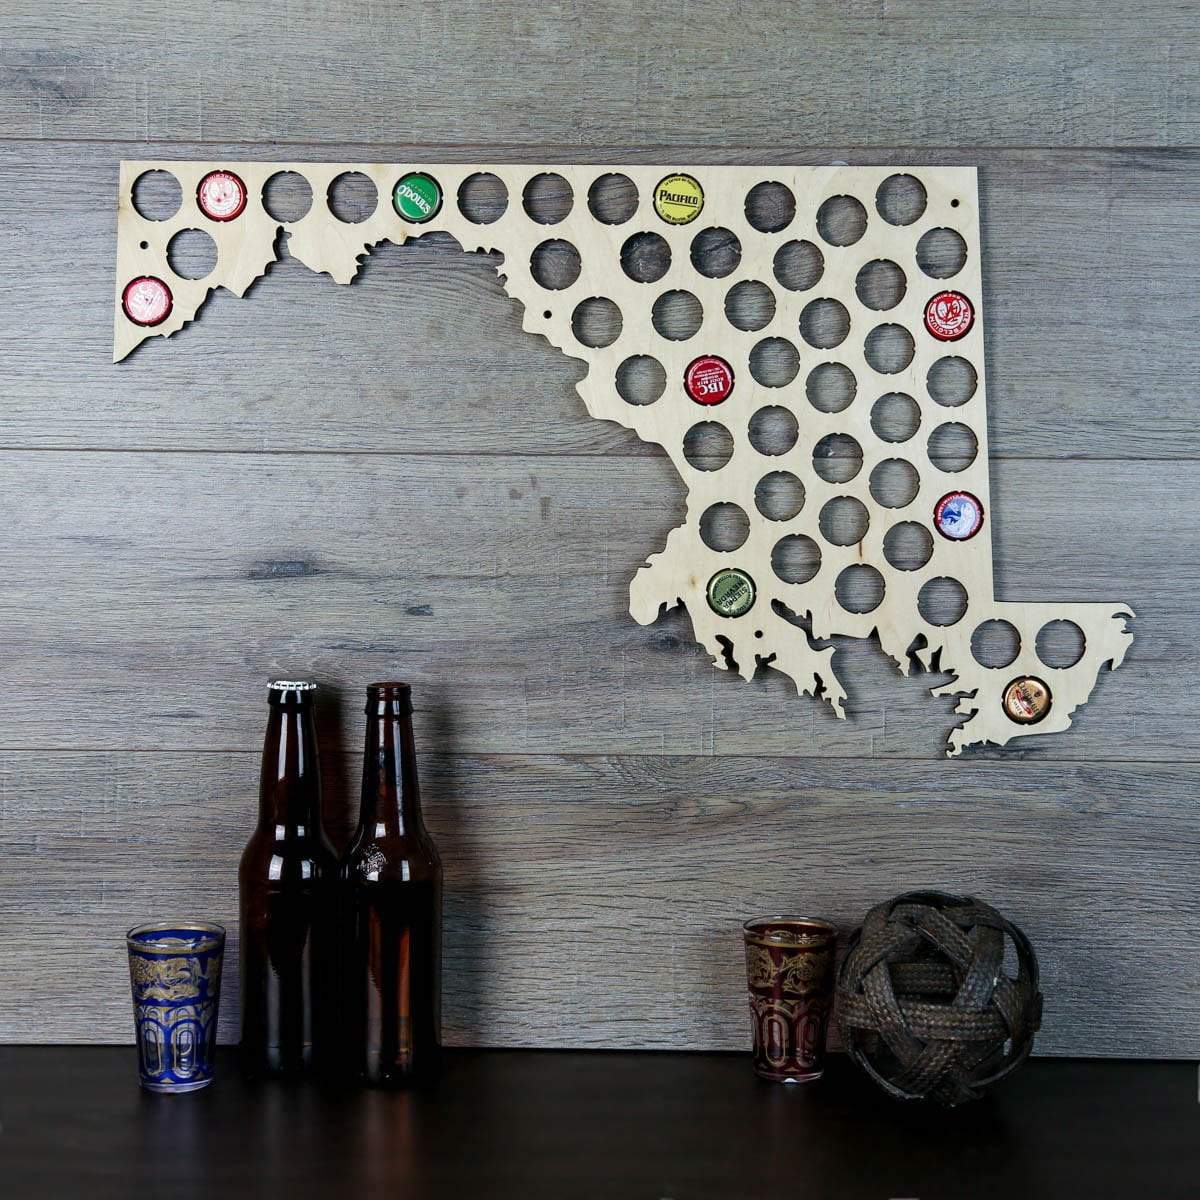 Torched Products Beer Bottle Cap Holder Maryland Beer Cap Map (777566388341)